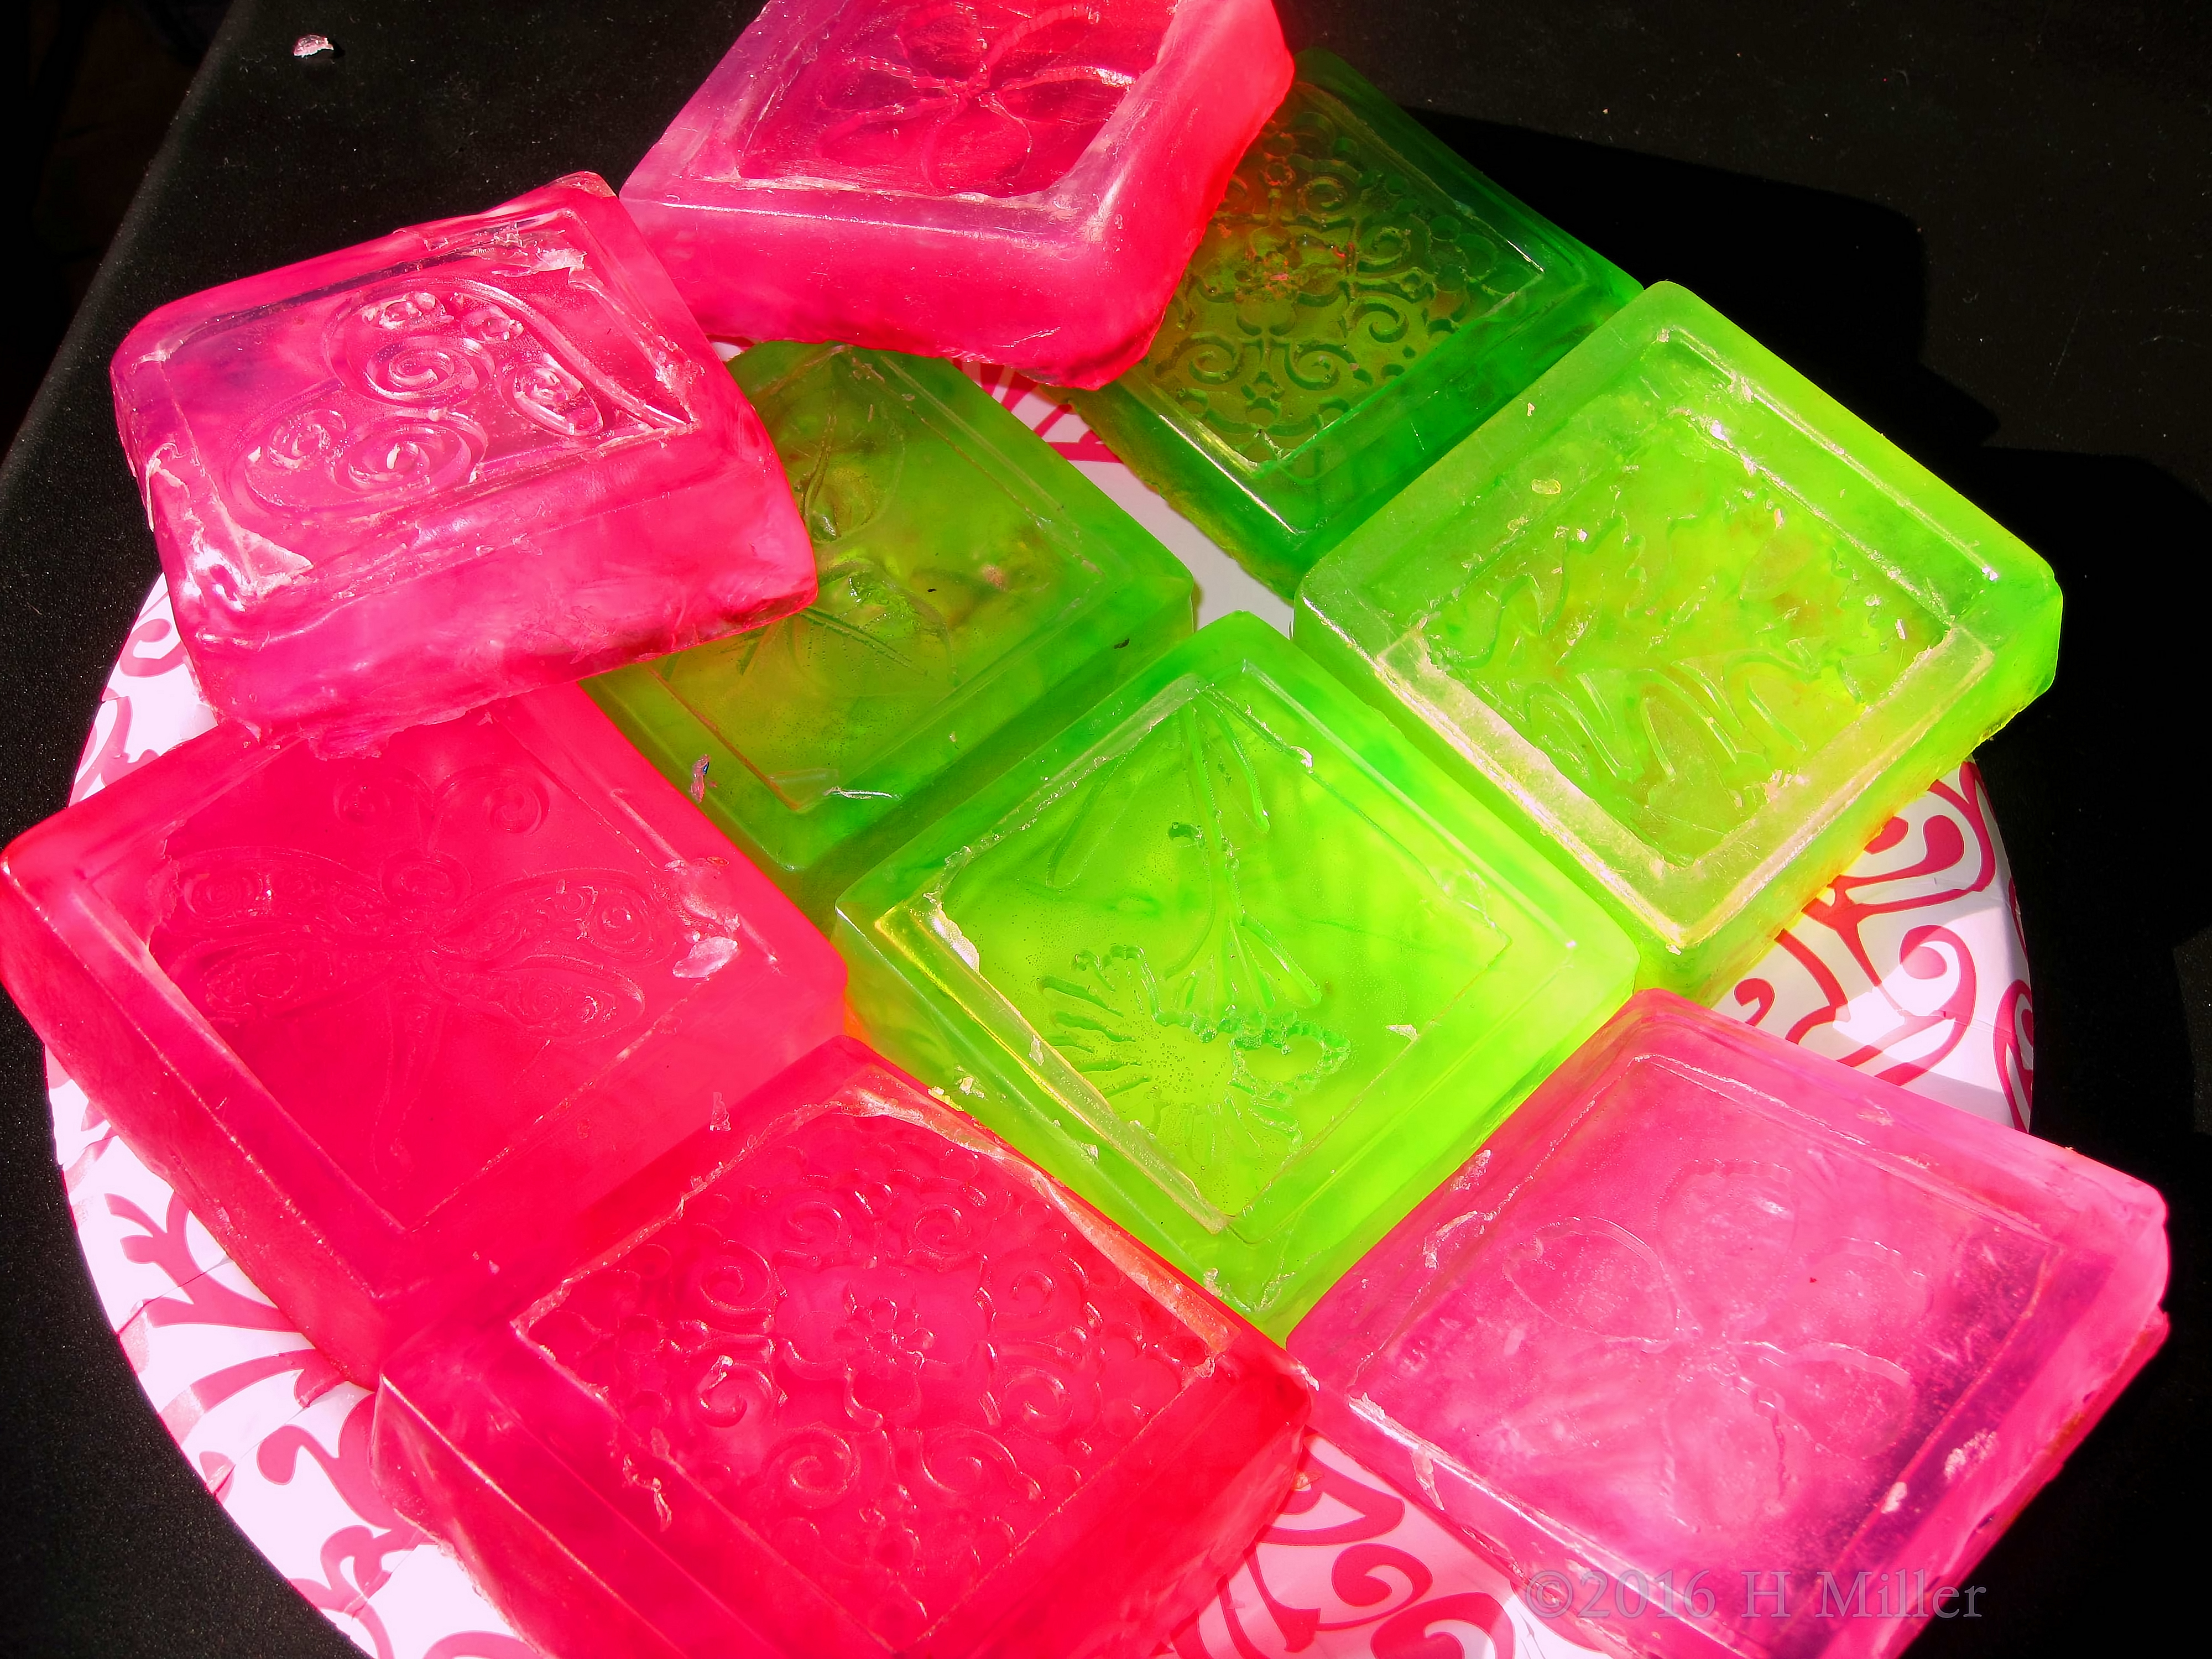 Check Out These Awesome Iridescent Kids Crafts Soap Projects! 